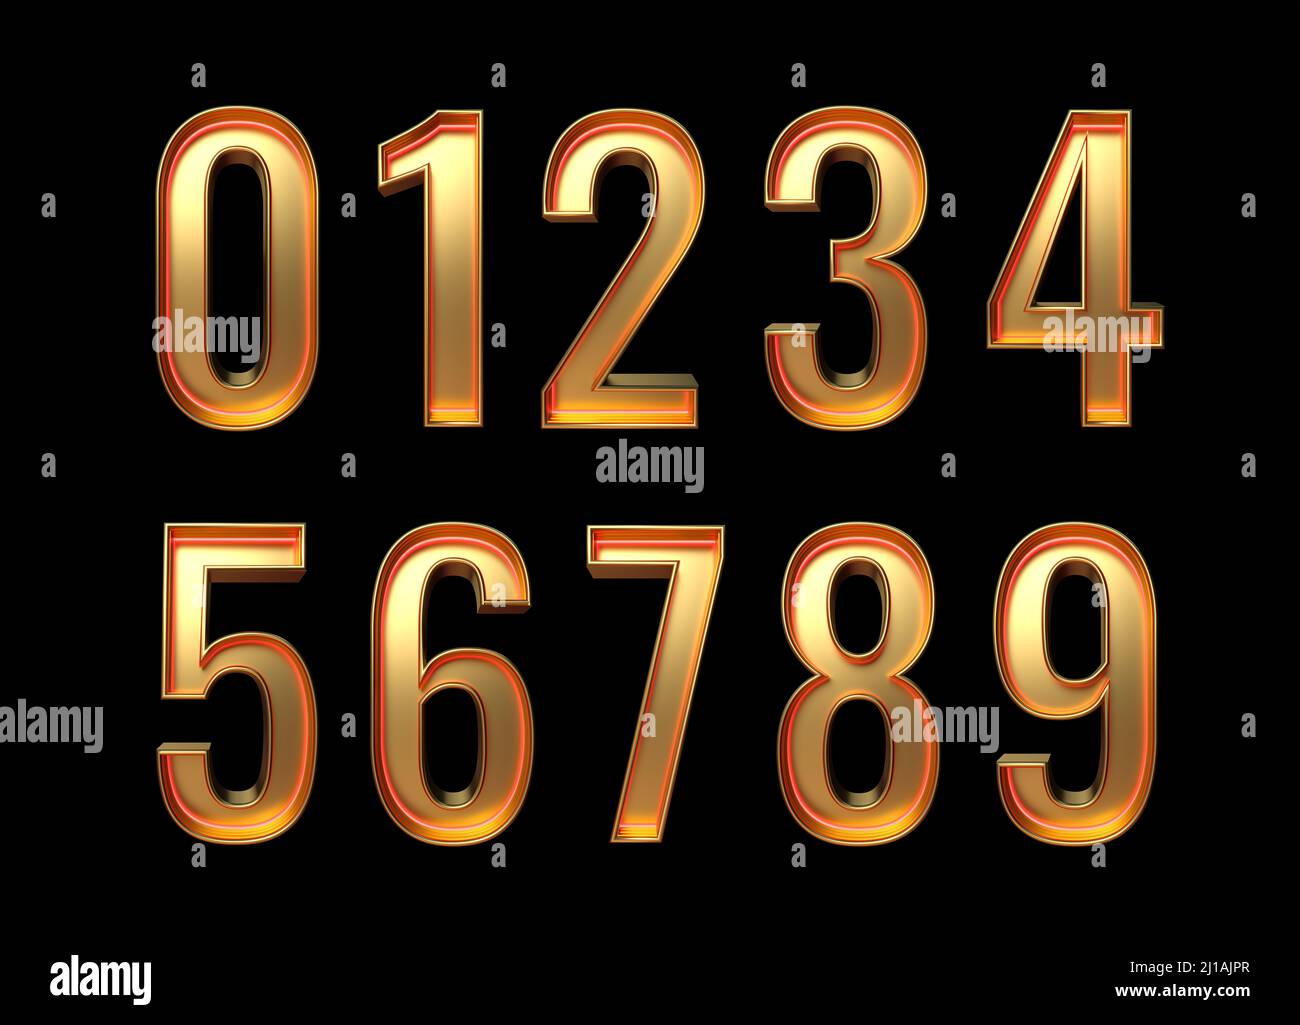 Alphabet. Retro 3d numbers isolated on a black background with Clipping Path. 3d illustration. Stock Photo